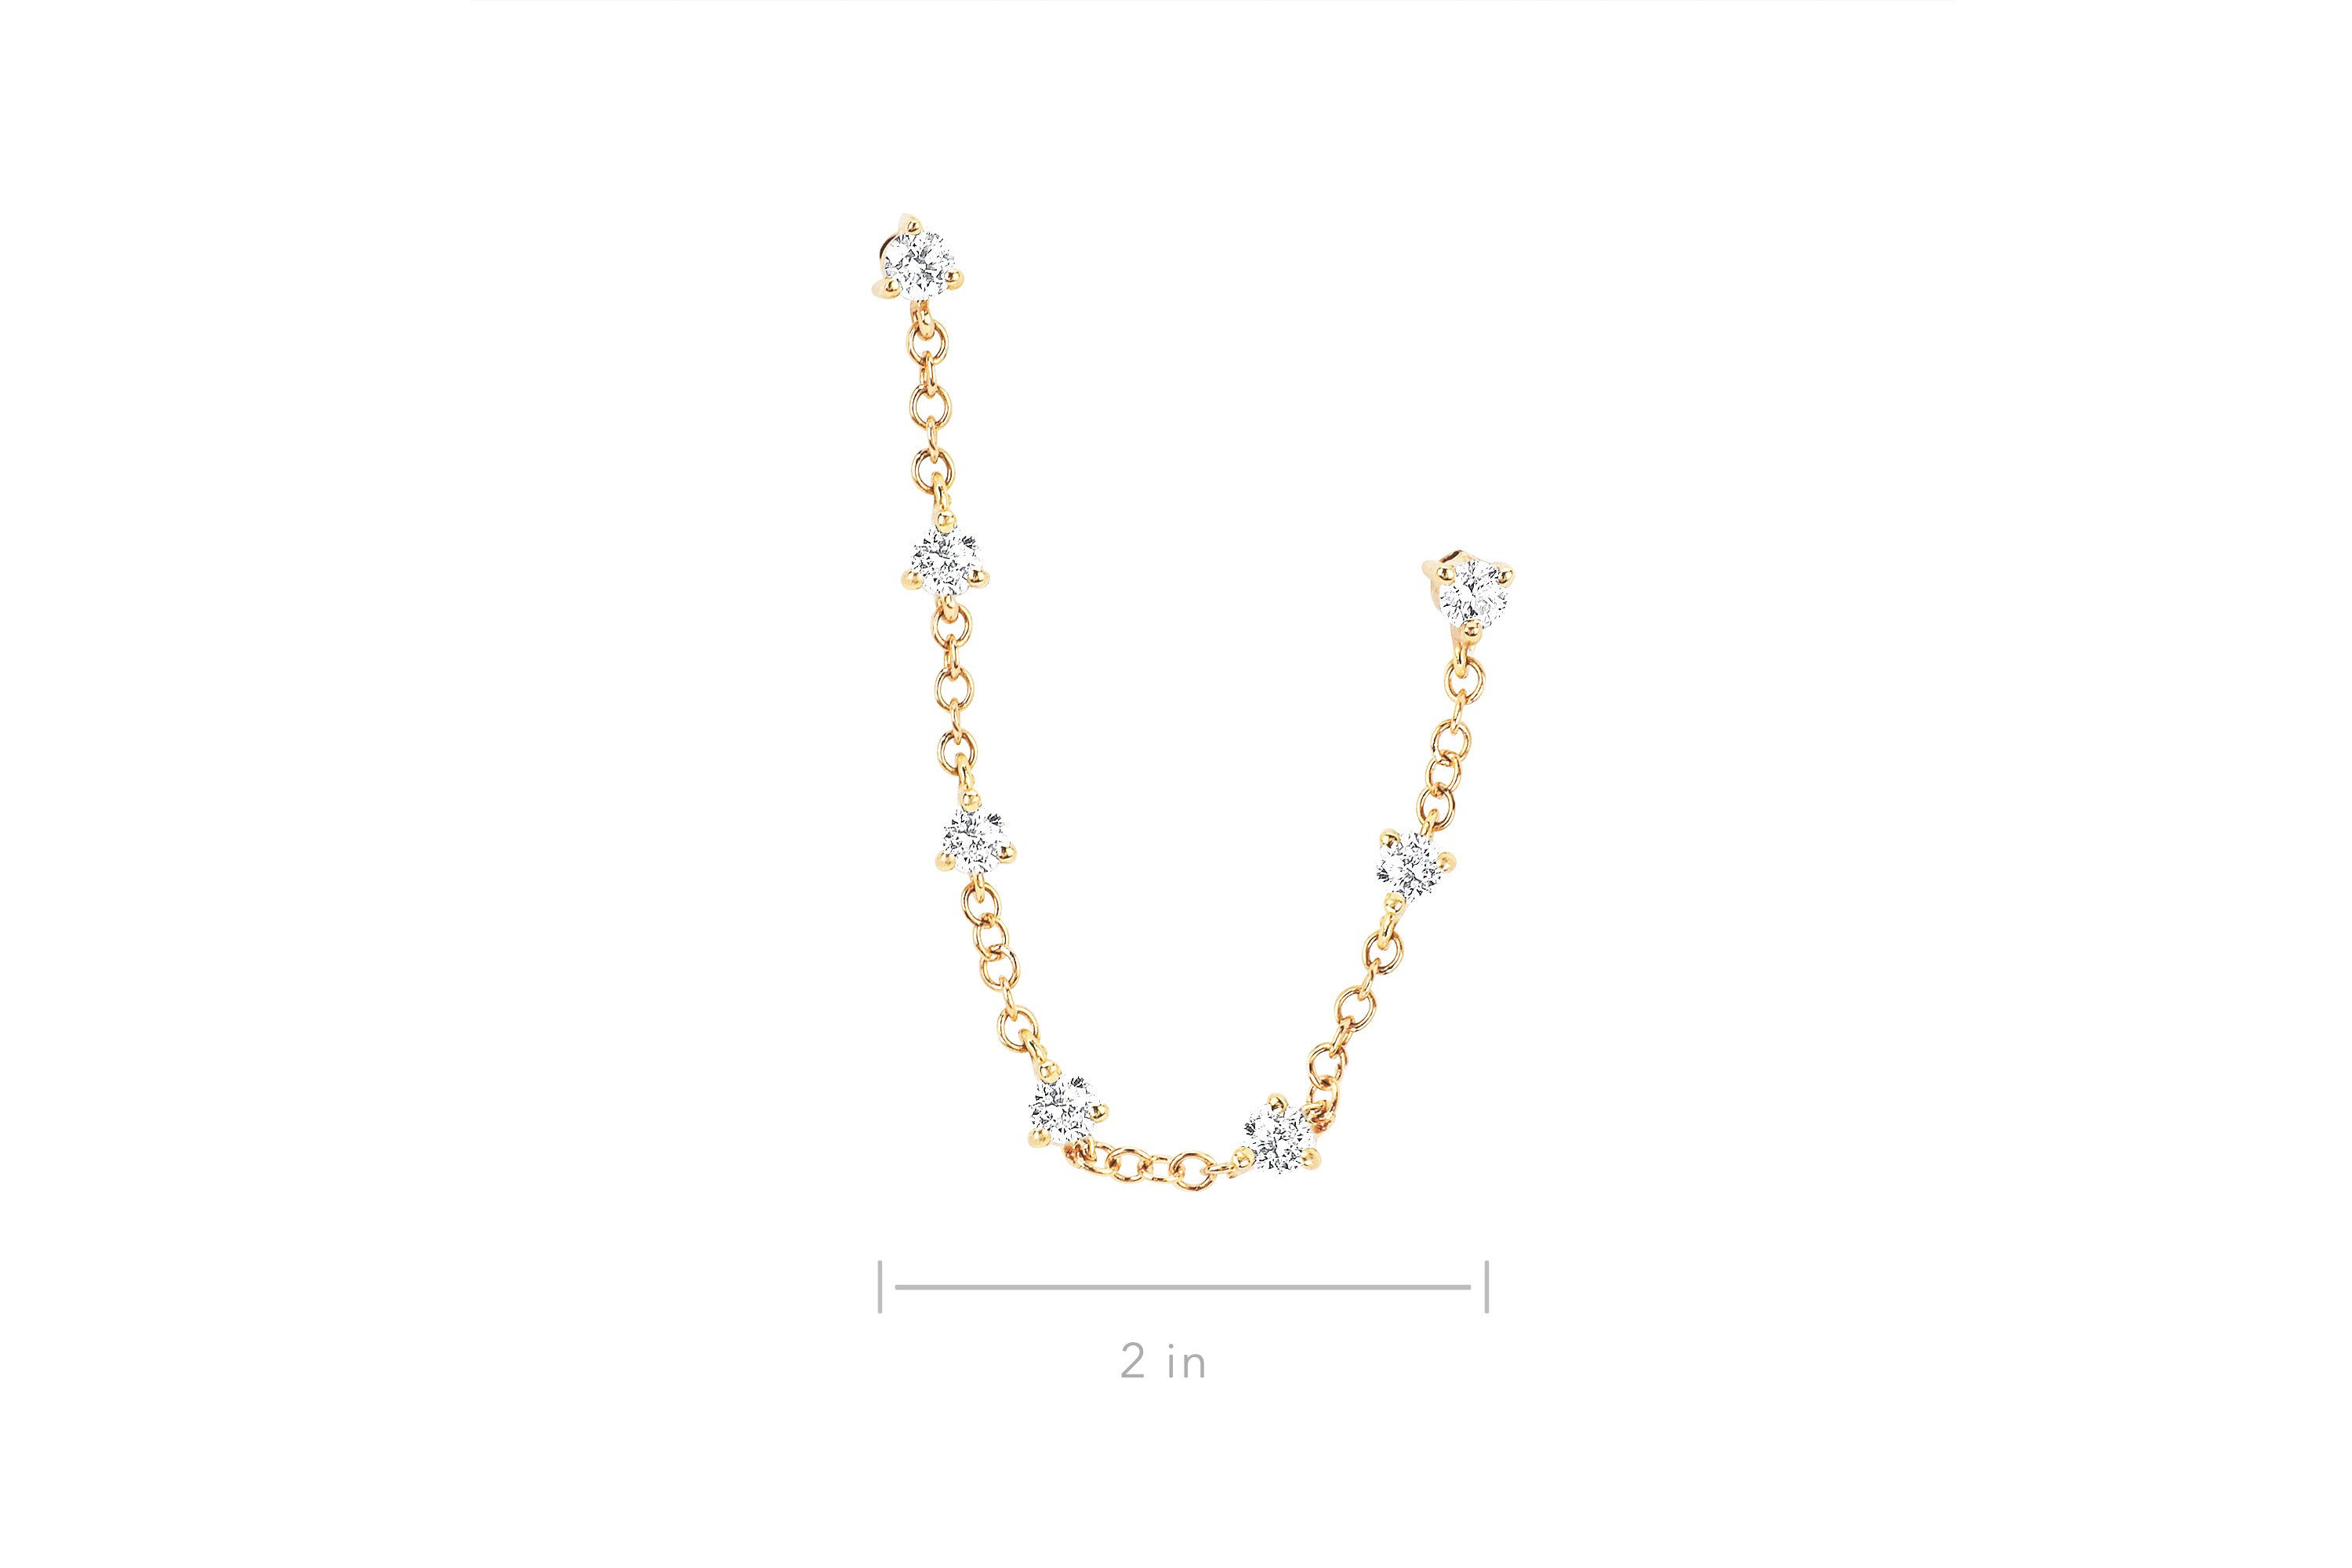 Diamond Double Stud Chain Earring in 14k yellow gold with size measurement of 2in length